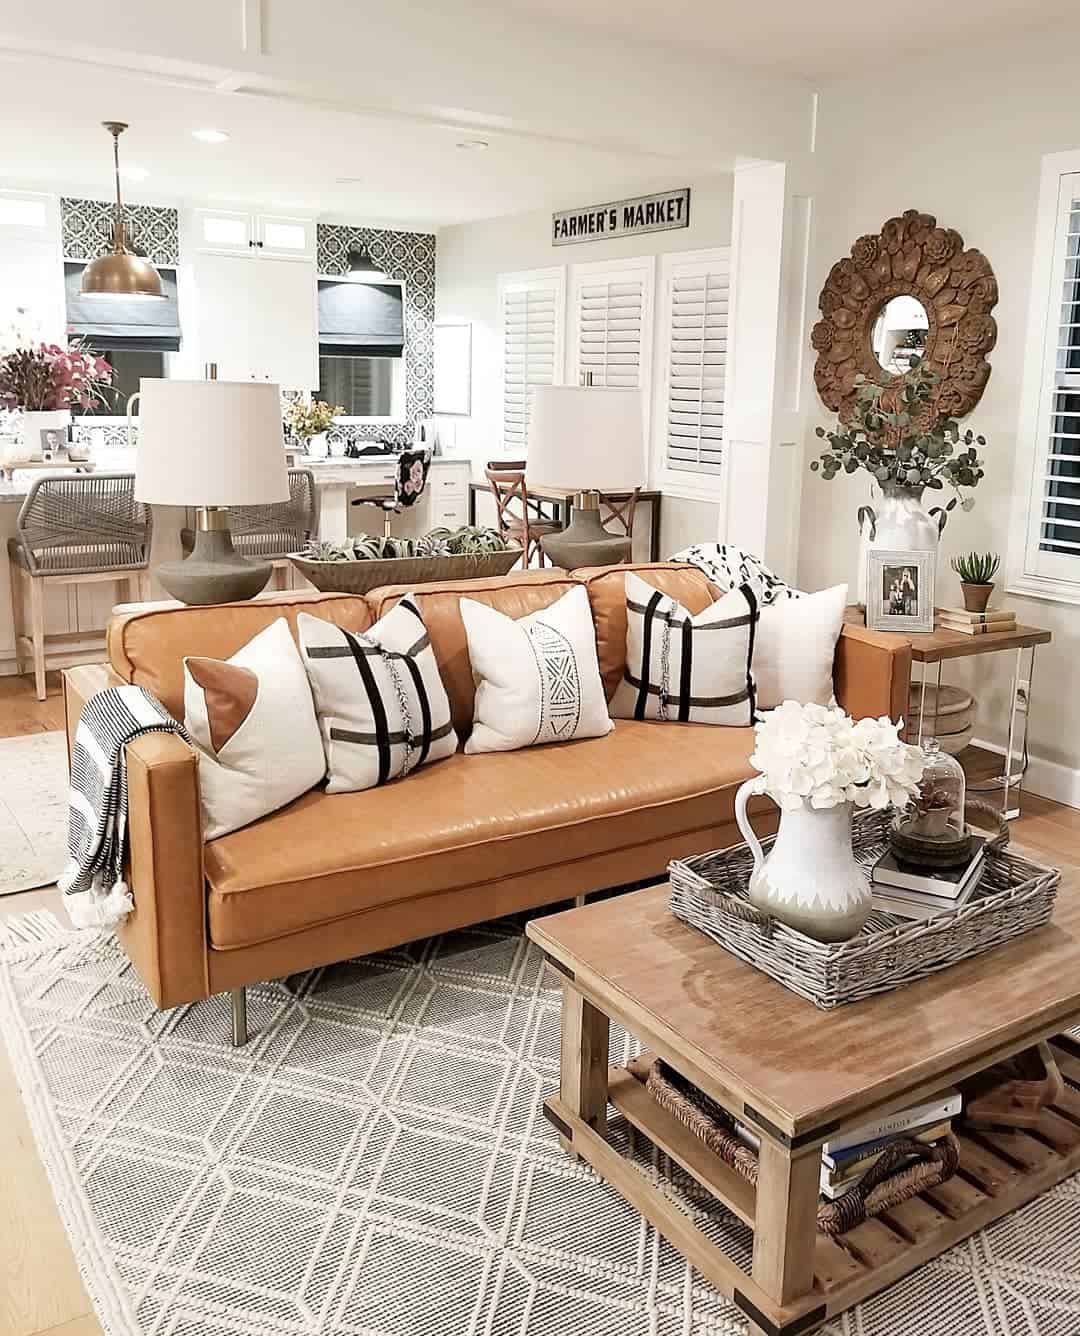 https://www.soulandlane.com/wp-content/uploads/2022/08/White-and-Black-Throw-Pillows-With-a-Modern-Brown-Leather-Couch.jpg